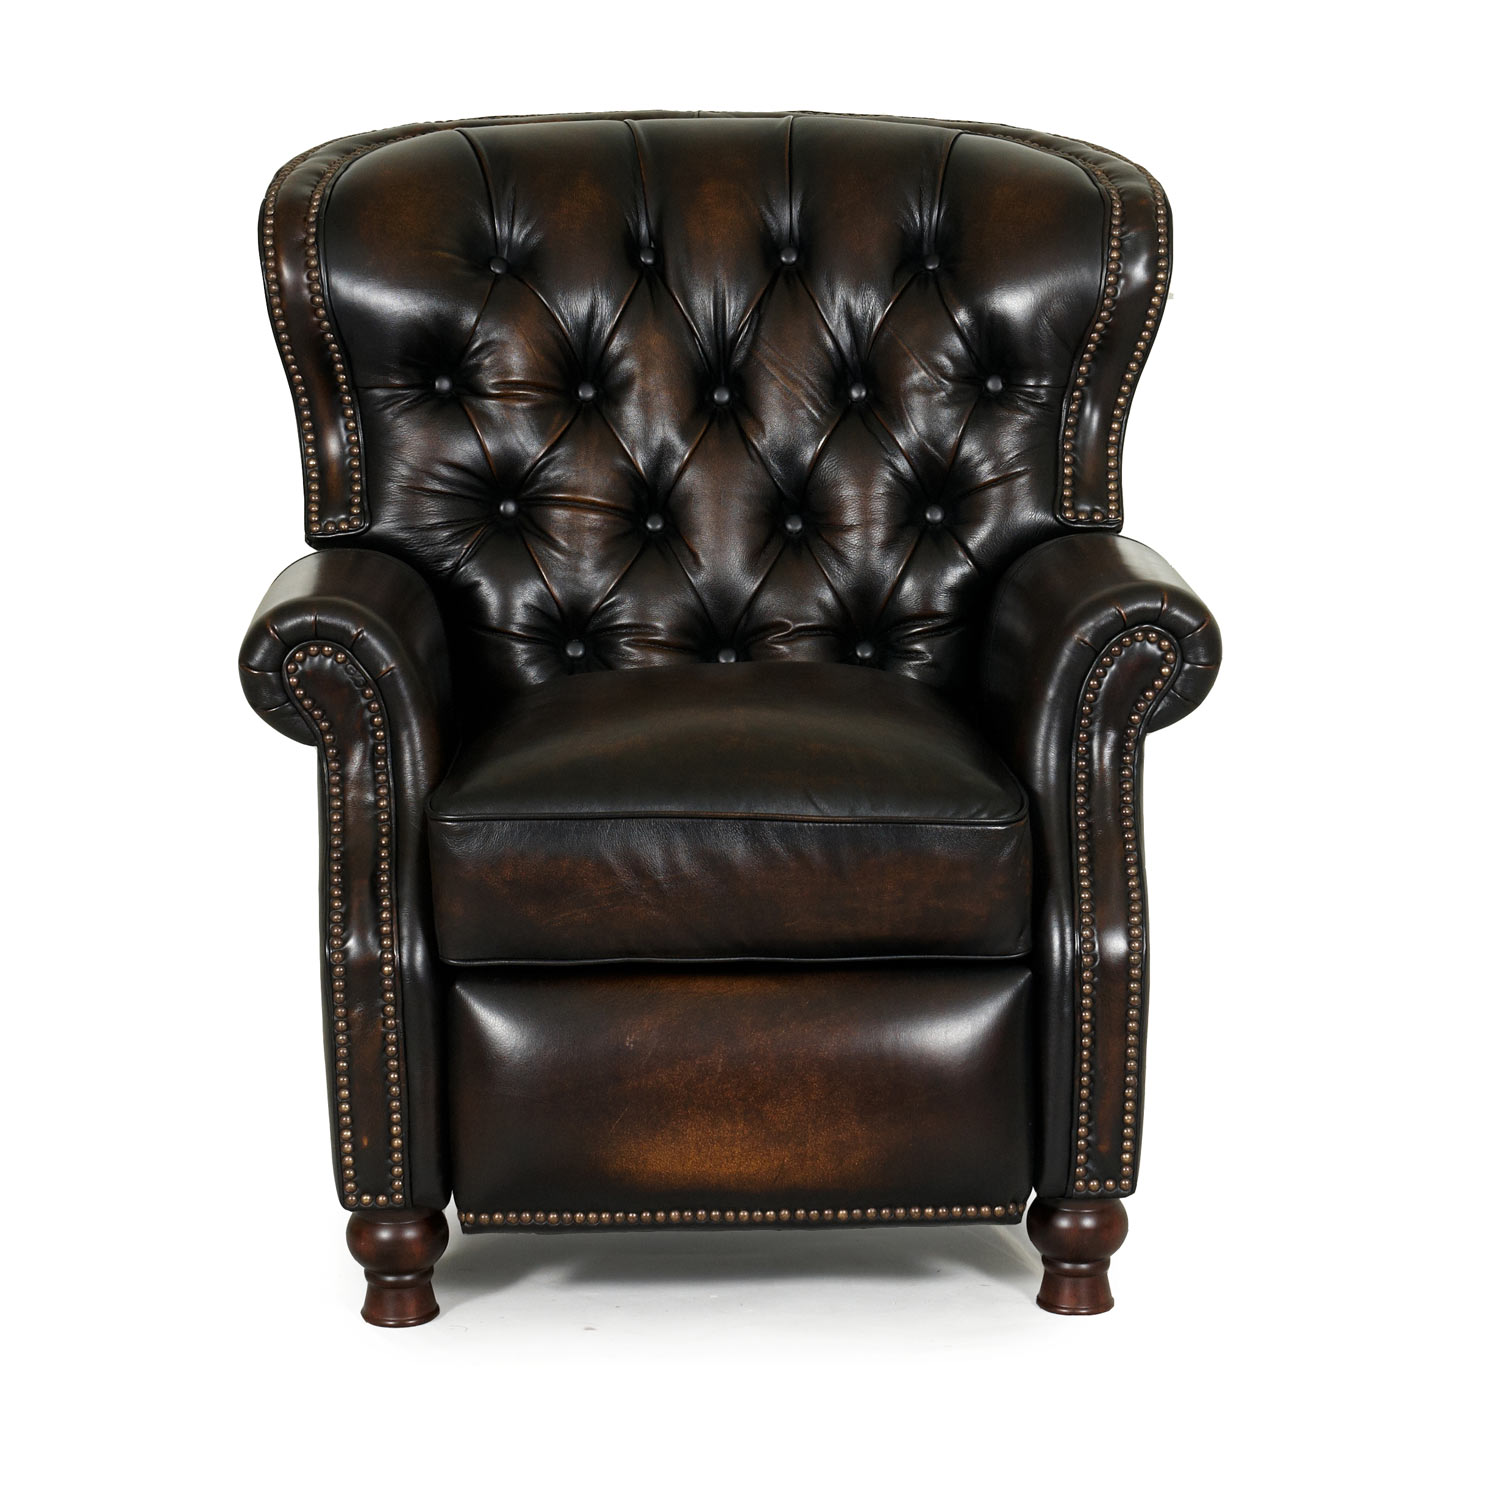 Barcalounger Presidential II Vintage Reserve Power Recliner Chair - Stetson Coffee